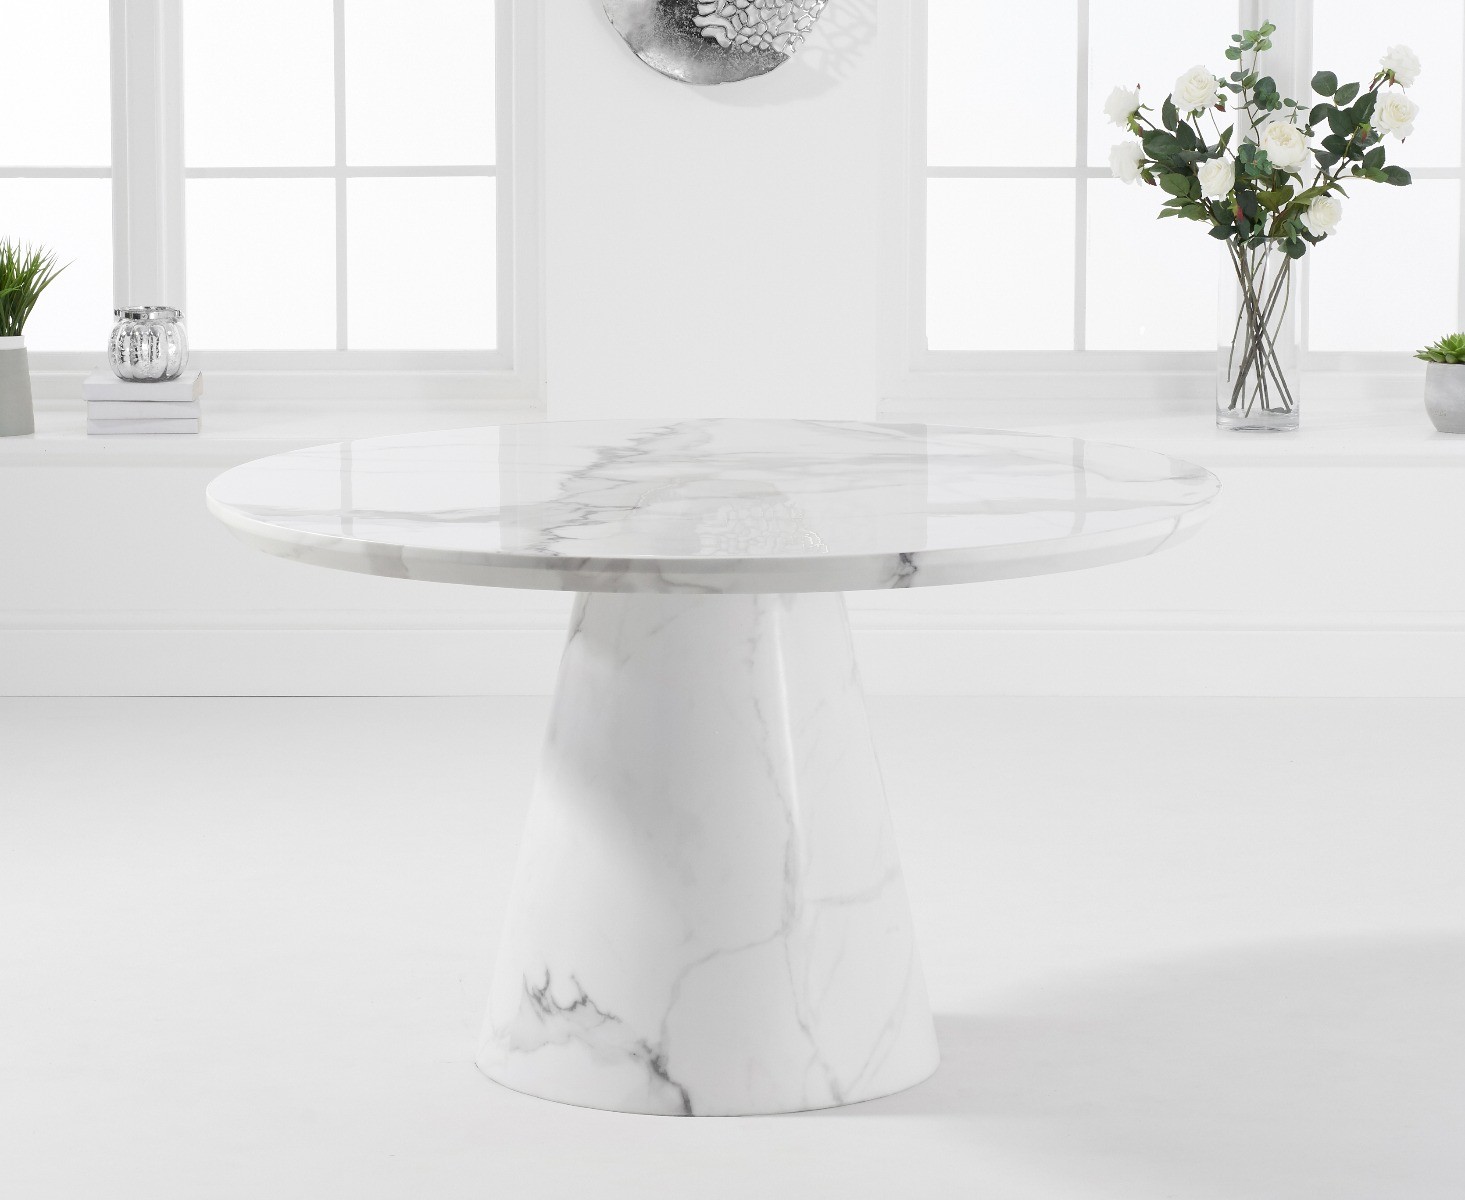 Photo 1 of Ravello 130cm round white marble dining table with 6 white aldo chairs